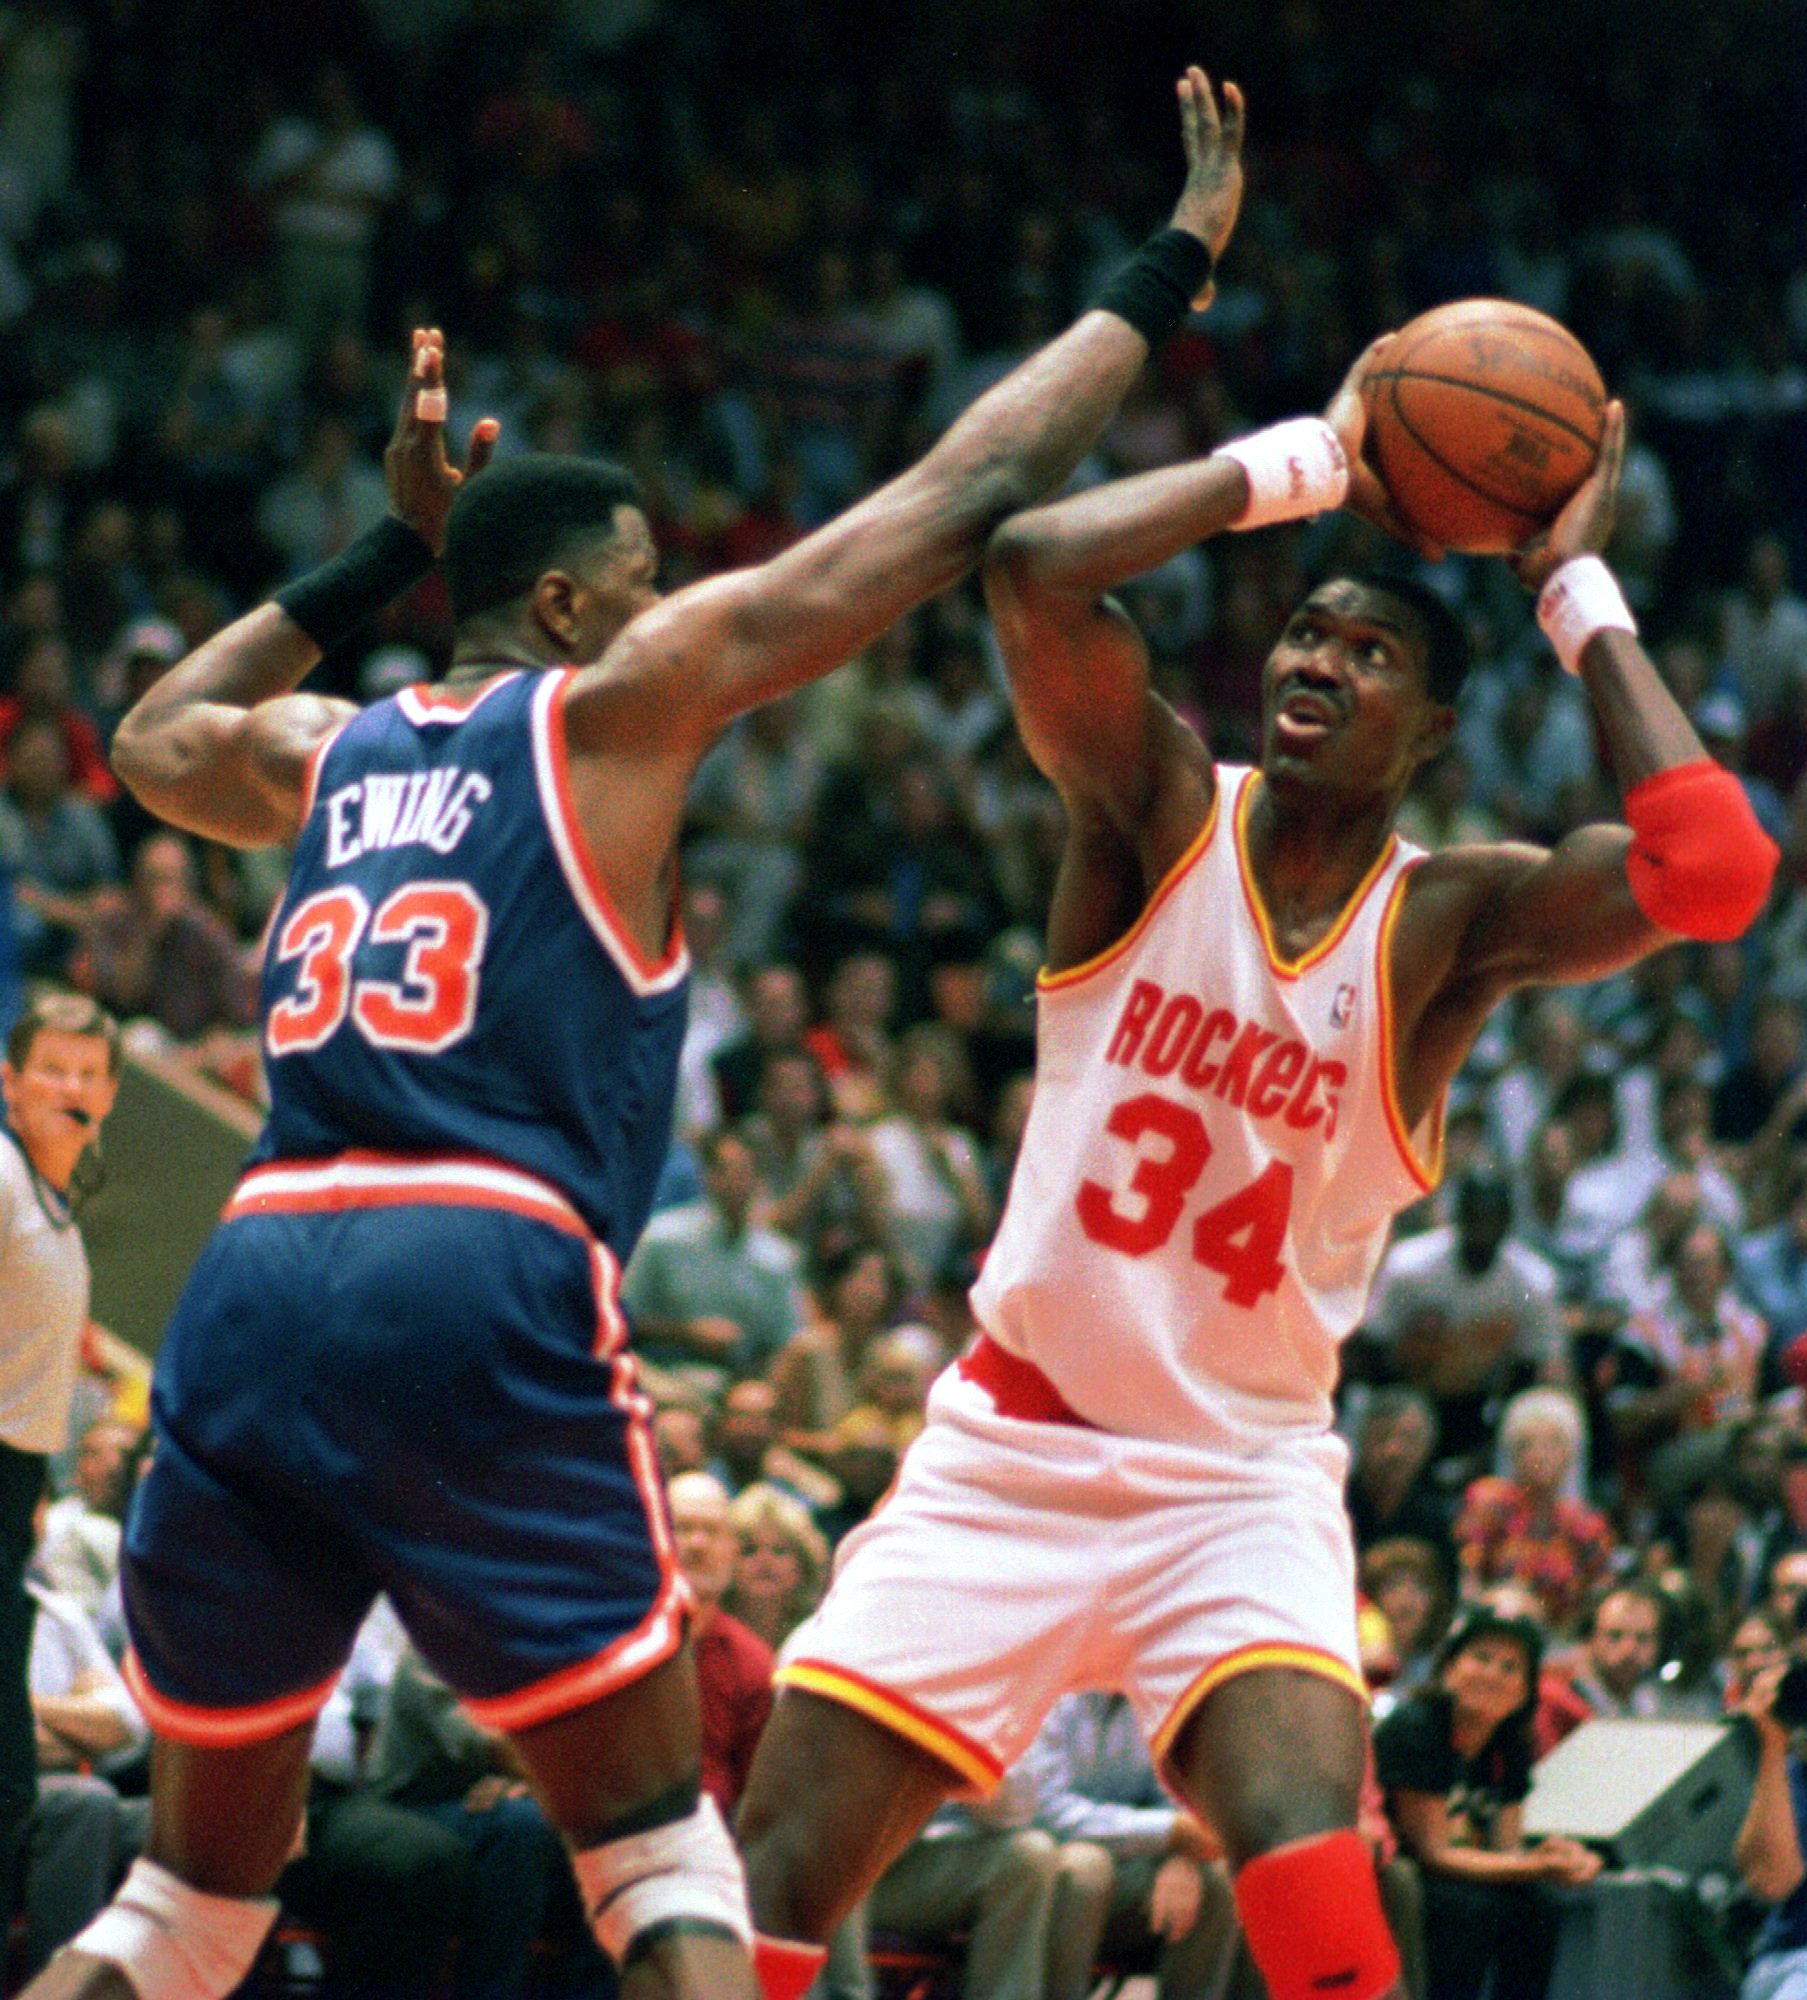 19 Jun 1994: HOUSTON ROCKET HAKEEM OLAJUWON LOOKS TO THE HOOP PAST NEW YORK KNICK PATRICK EWING DURING FIRST HALF ACTION OF GAME 6 OF THE NBA CHAMPIONSHIP AT THE SUMMIT IN HOUSTON, TEXAS.